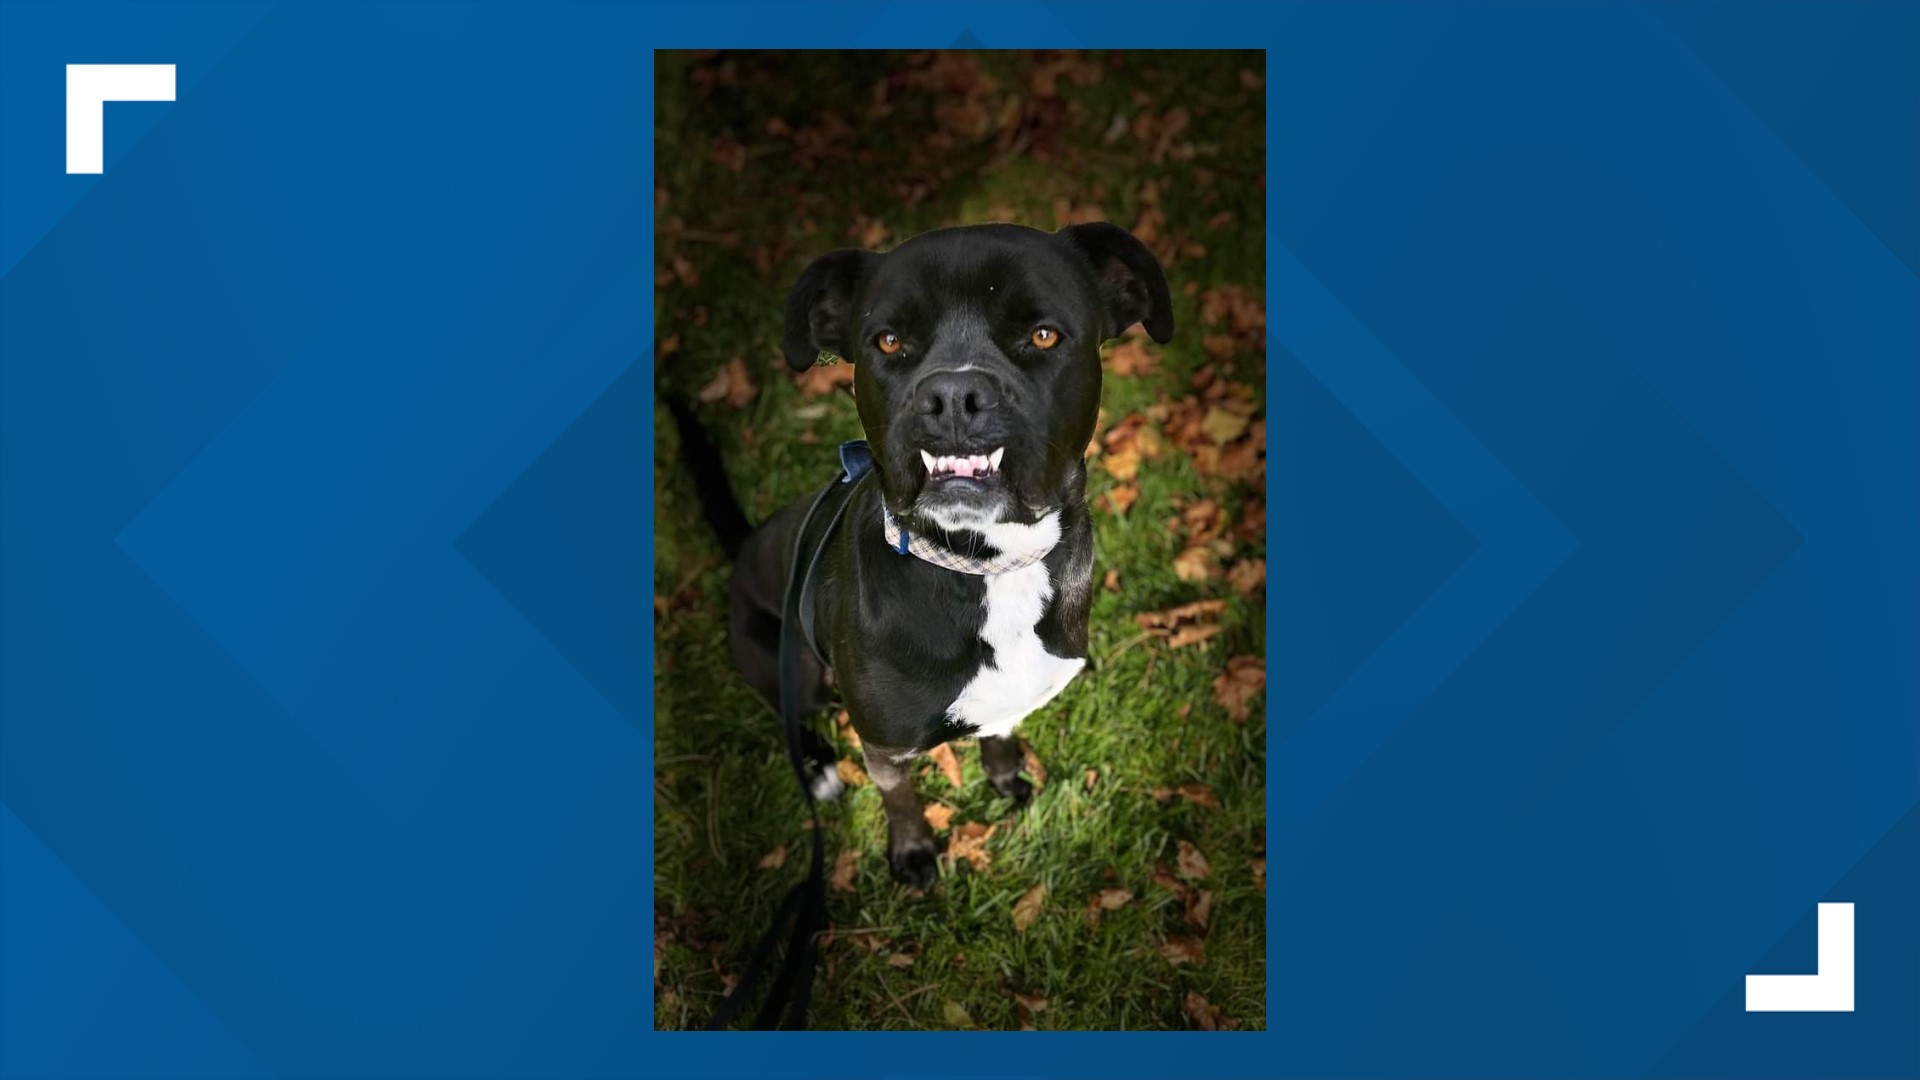 He is a 1-and-a-half-year-old Boxer/Labrador mix, and is neutered, microchipped, and up-to-date on his vaccines.